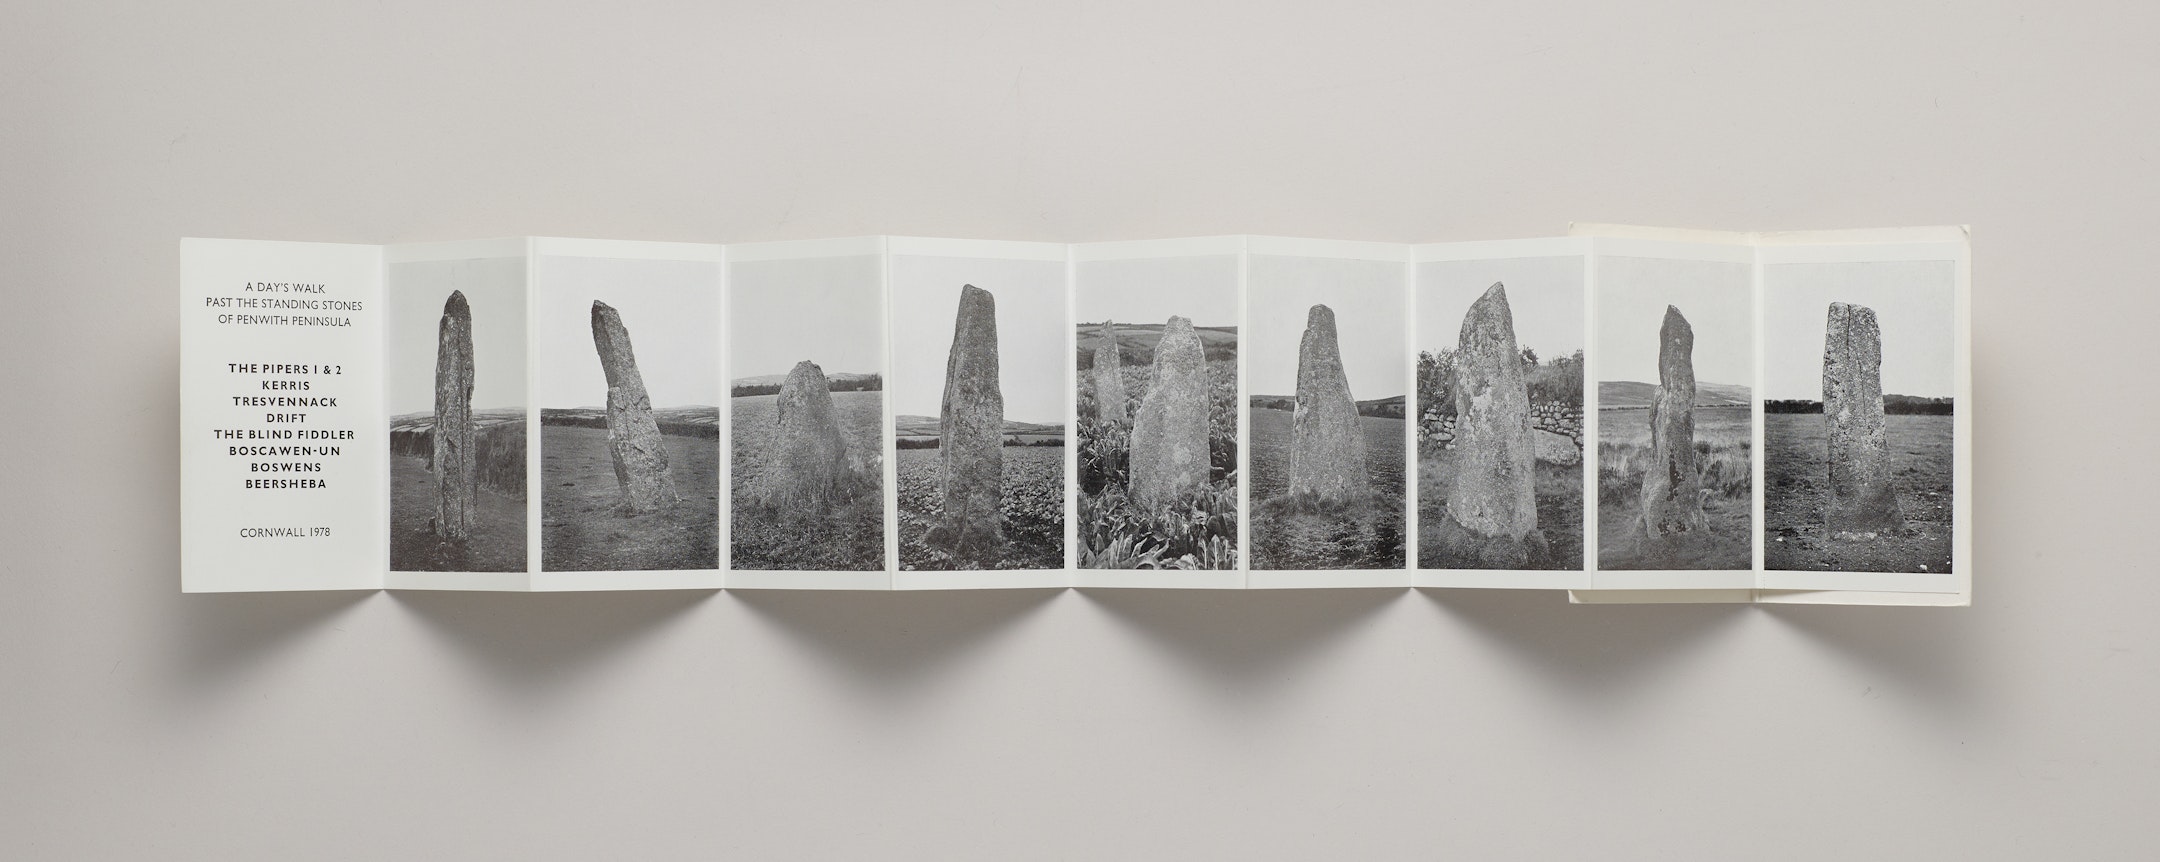 A Days Walk Past the Standing Stones of Penwith Peninsula